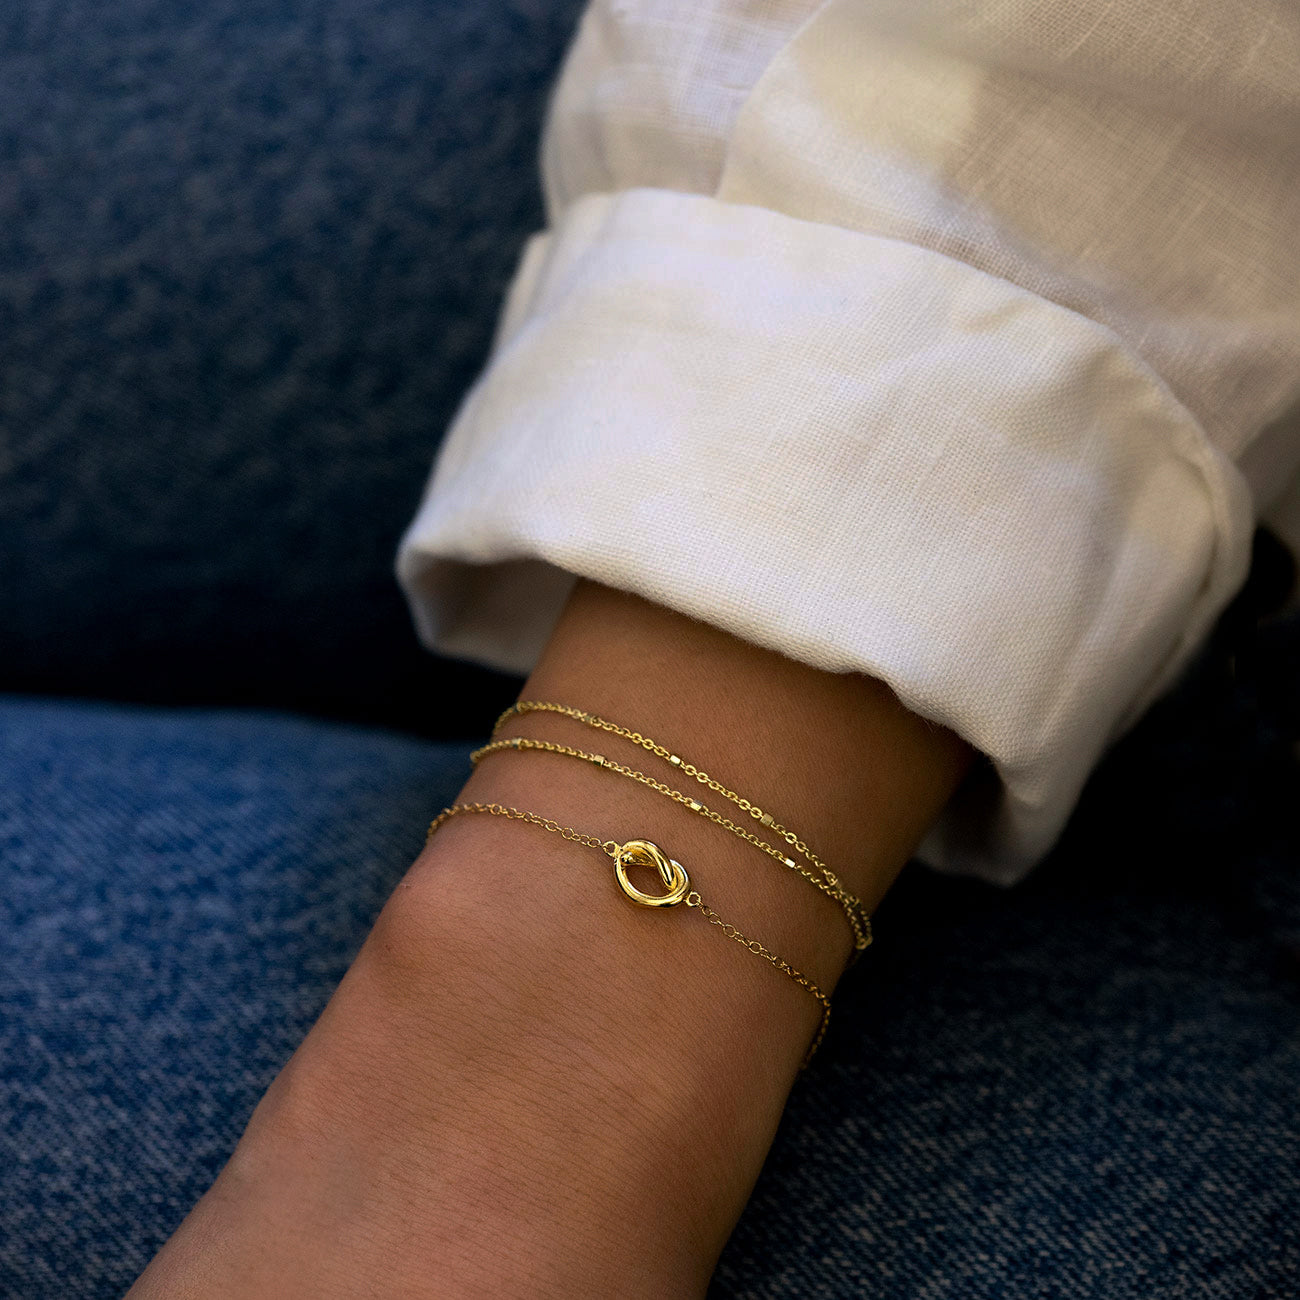 Dainty Double Chain Bracelet in Solid 14K Gold 7 inch / 14K Yellow Gold